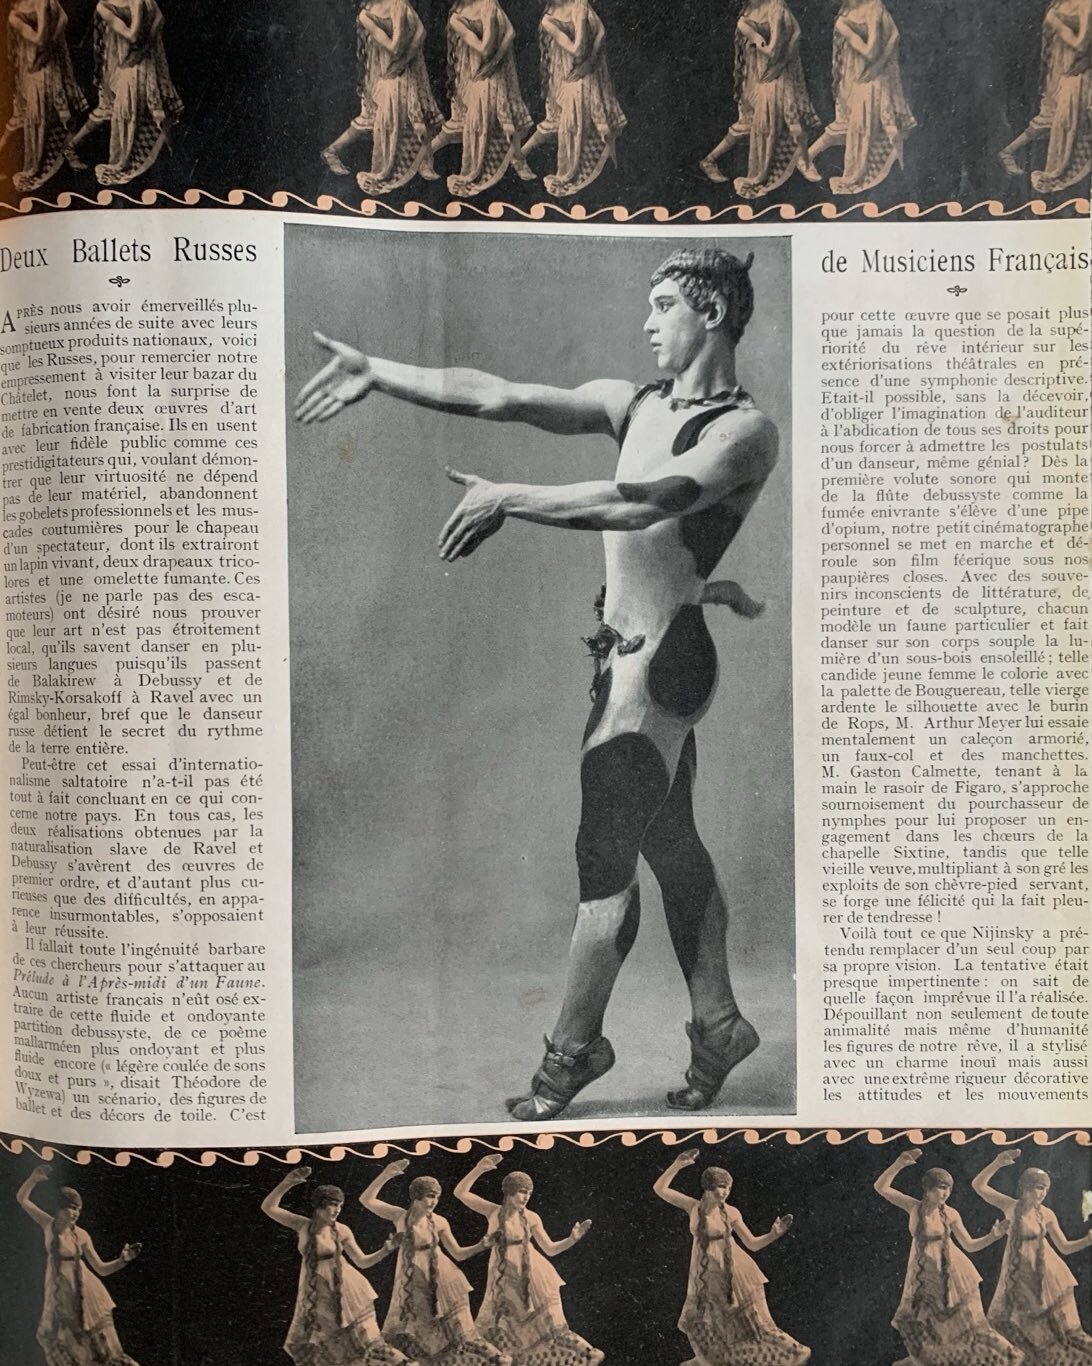 It is a page of May 1912 issue of &ldquo;Comoedia illustrate&rdquo; Nijinsky. The ballet, The Afternoon of a Faun, was choreographed by Vaslav Nijinsky for the Ballets Russes, and was first performed in the Th&eacute;&acirc;tre du Ch&acirc;telet in P